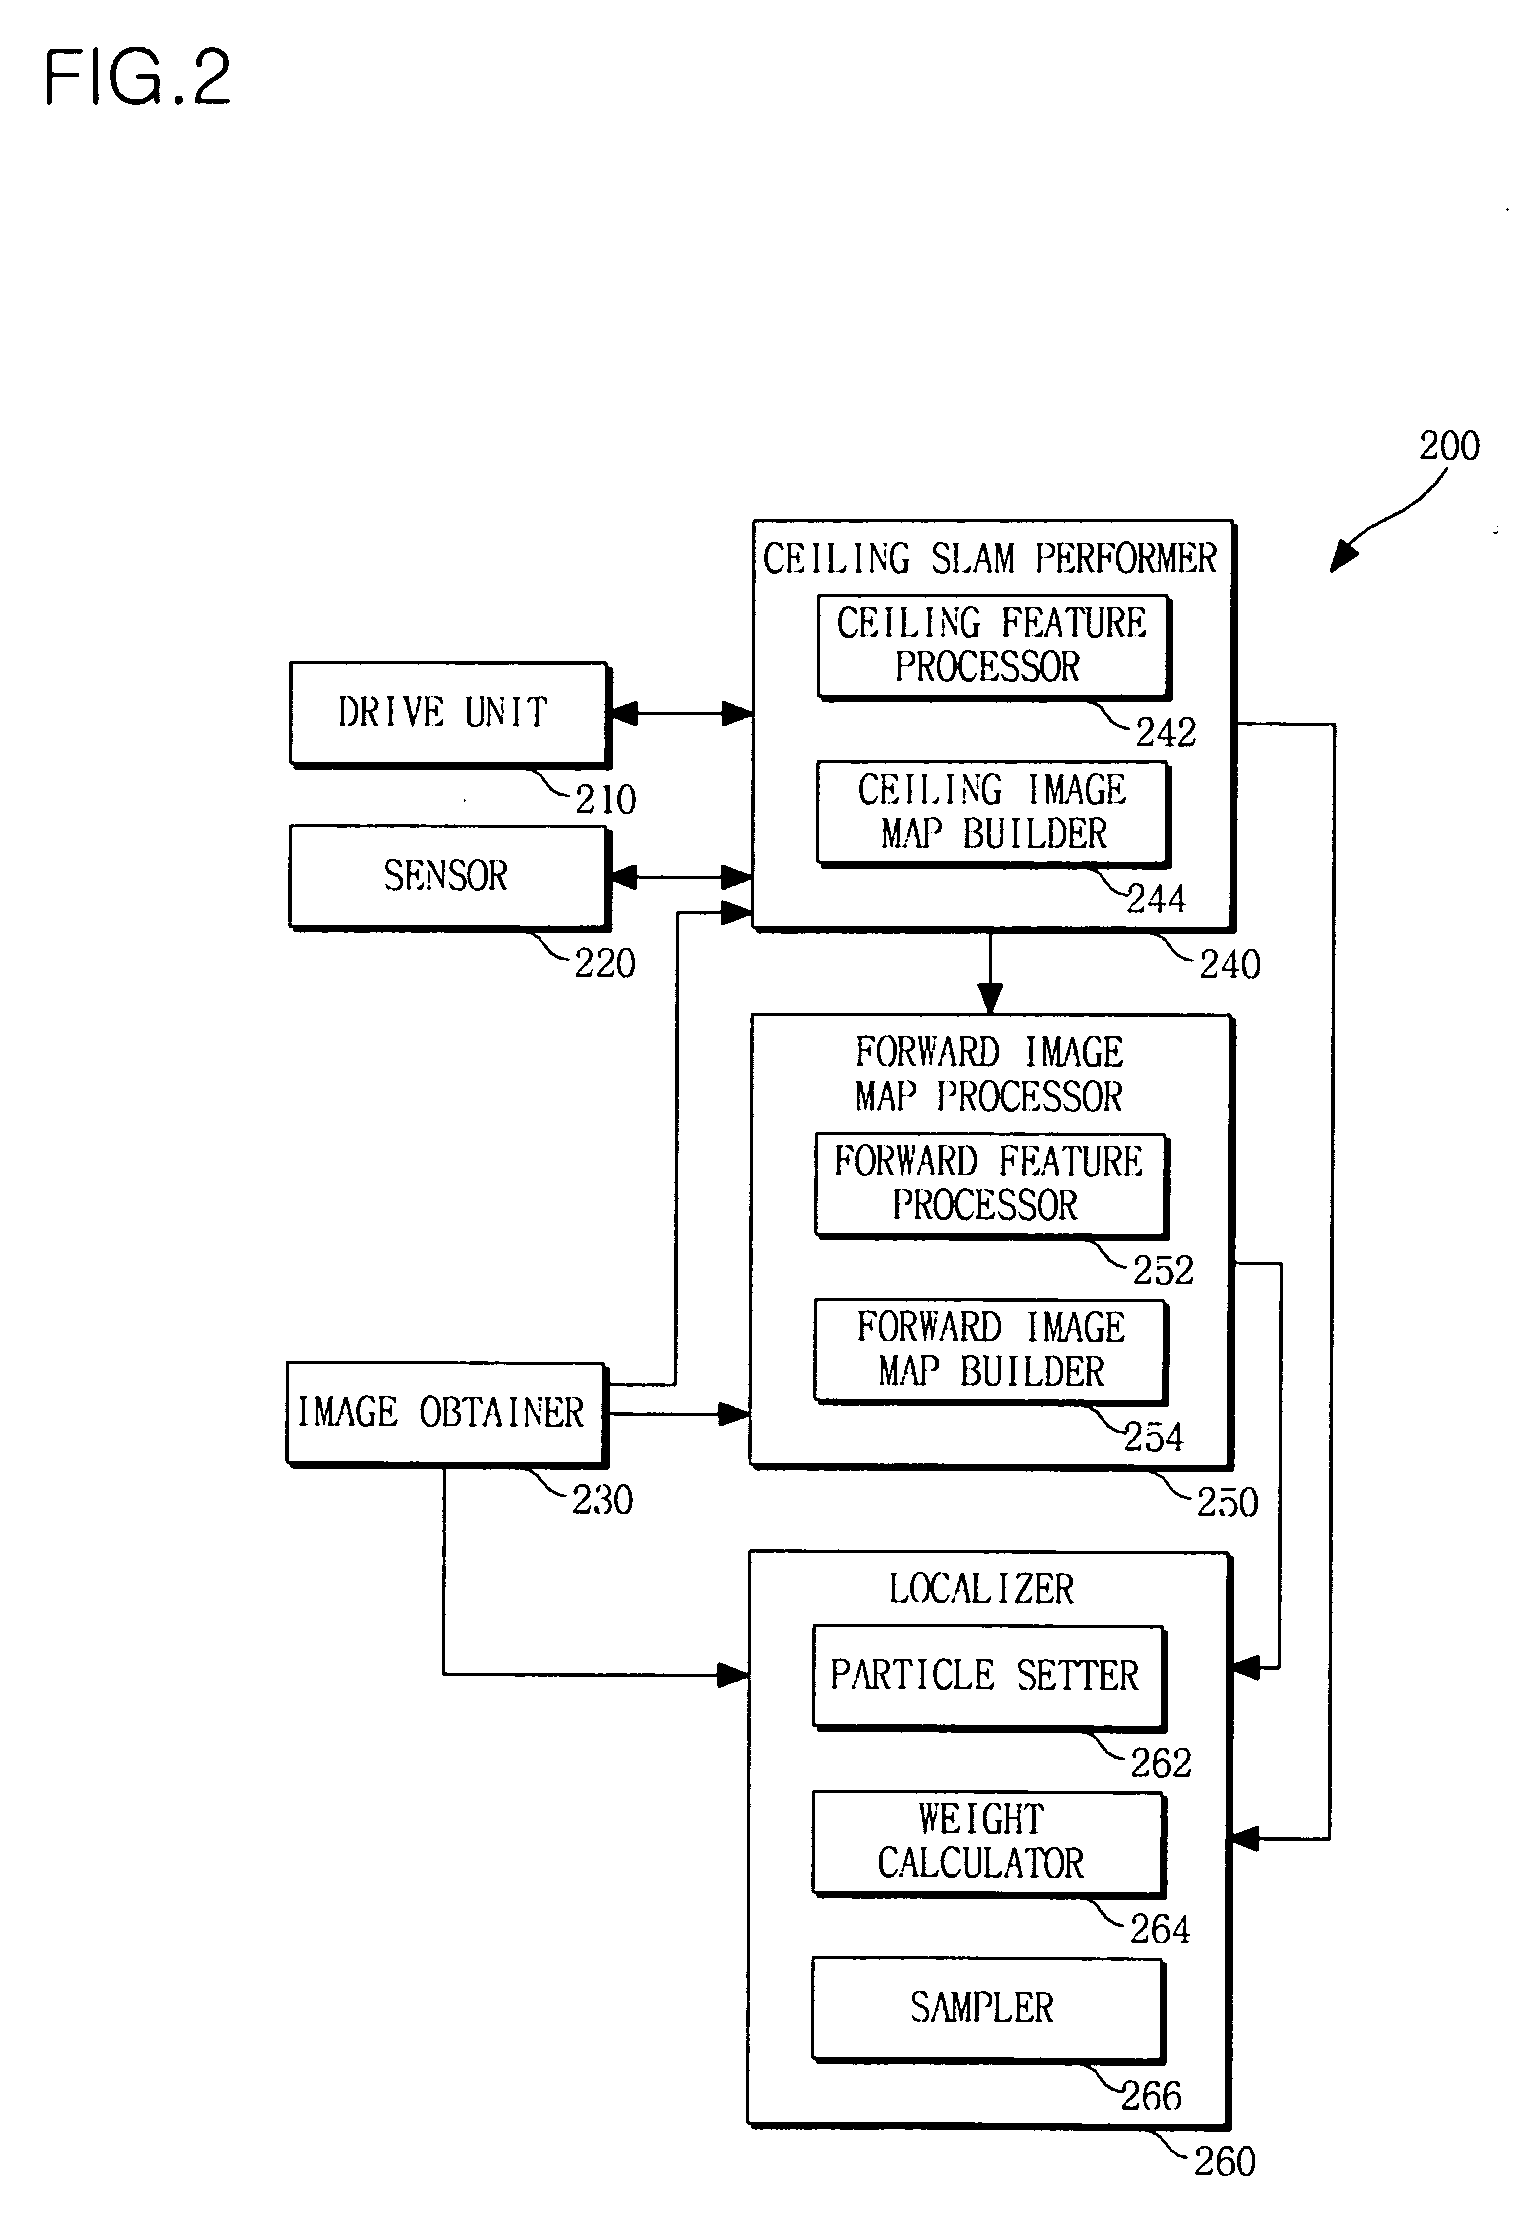 Apparatus and method for localizing mobile robot